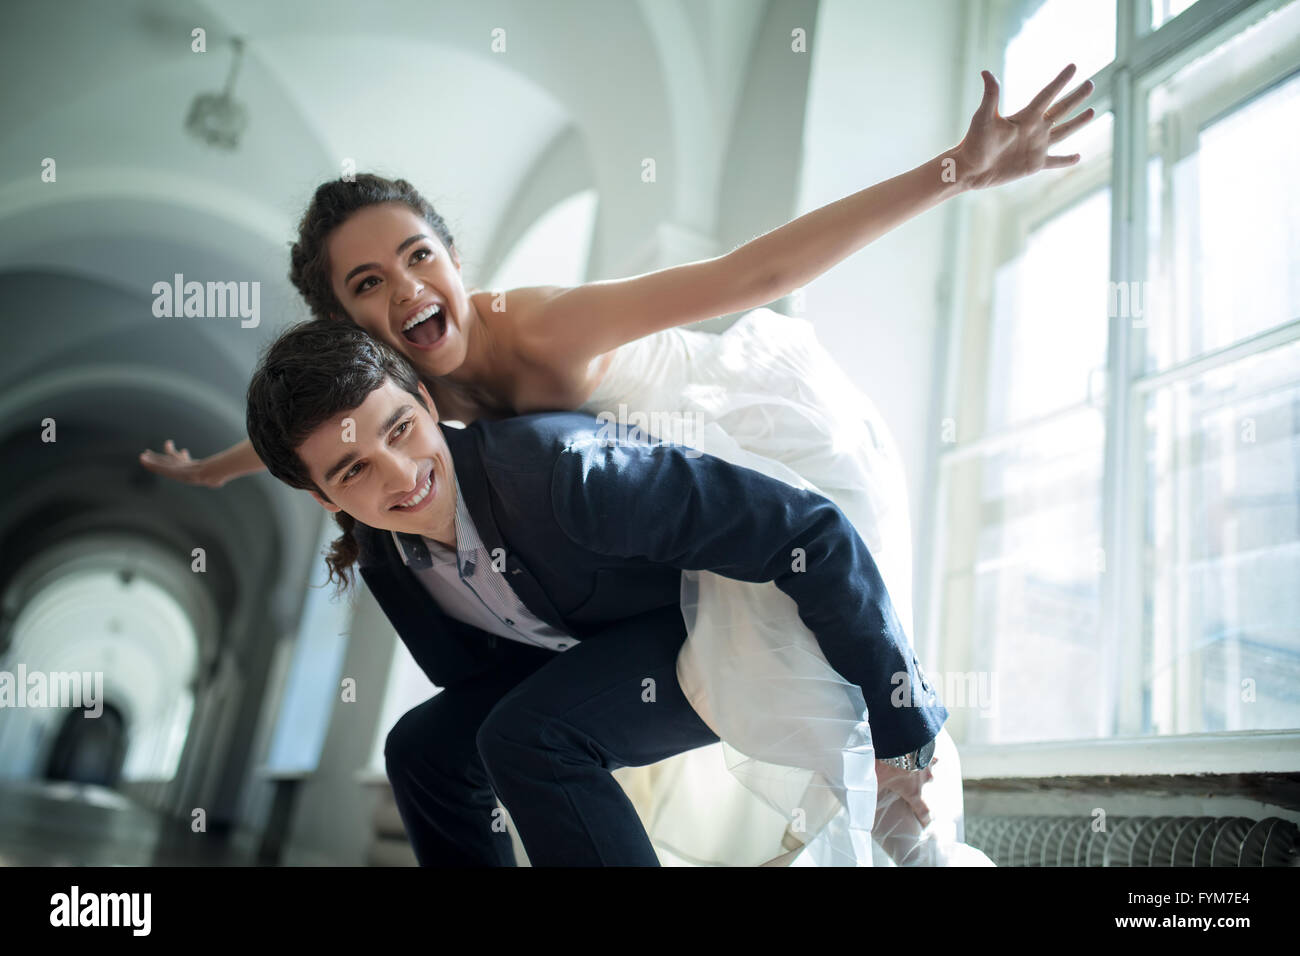 Young couple fooling around. Stock Photo